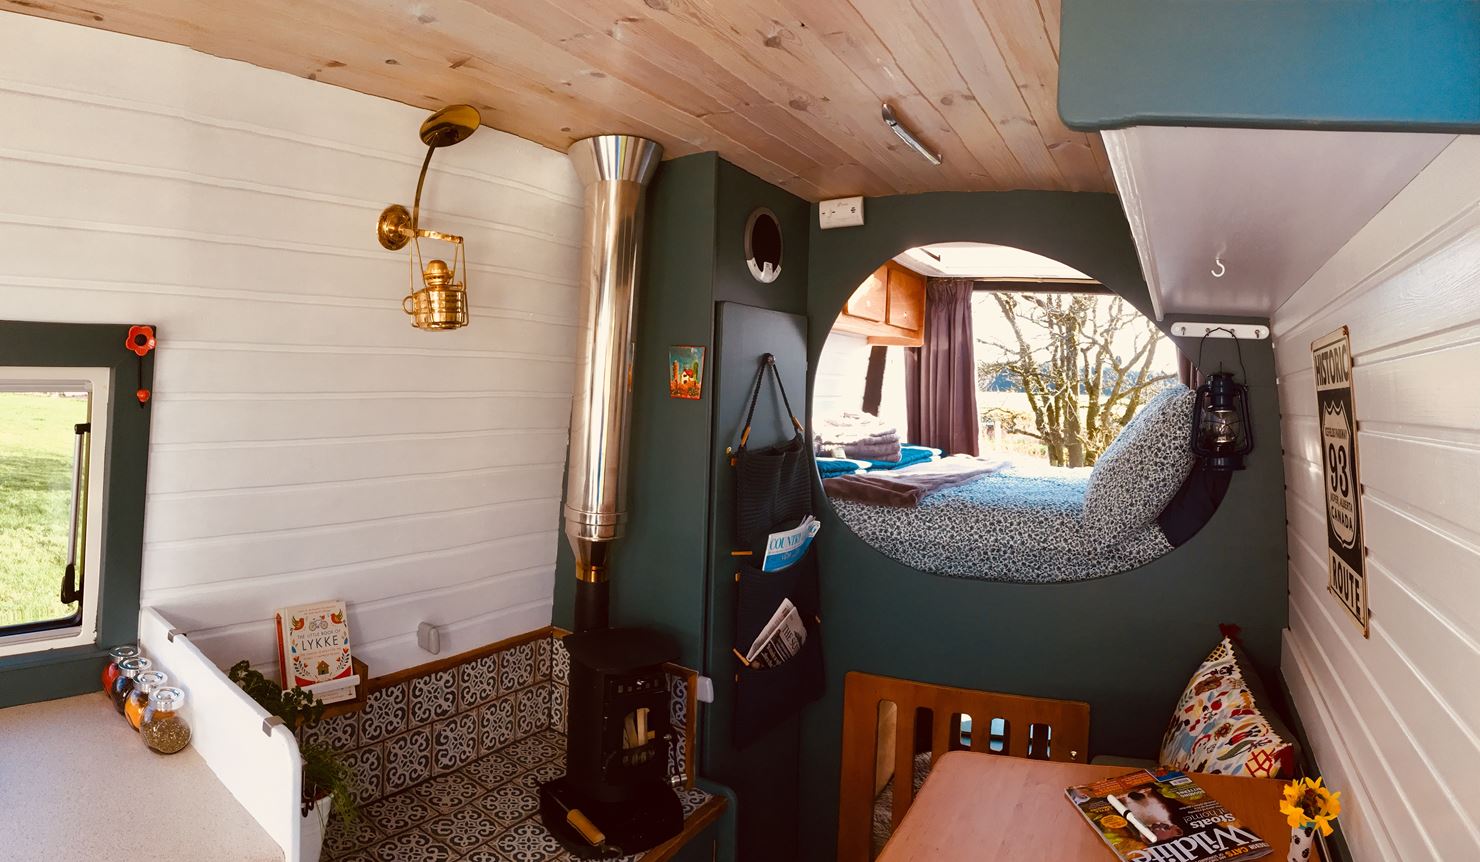 Interior of a cozy camper van featuring a daybed with a round window view, a small kitchen with a sink, a wooden countertop with a colorful pillow and books on it, a wall-mounted lamp, a stove with a rustic chimney, and a wooden ceiling. A potted plant and decorative items add charm.